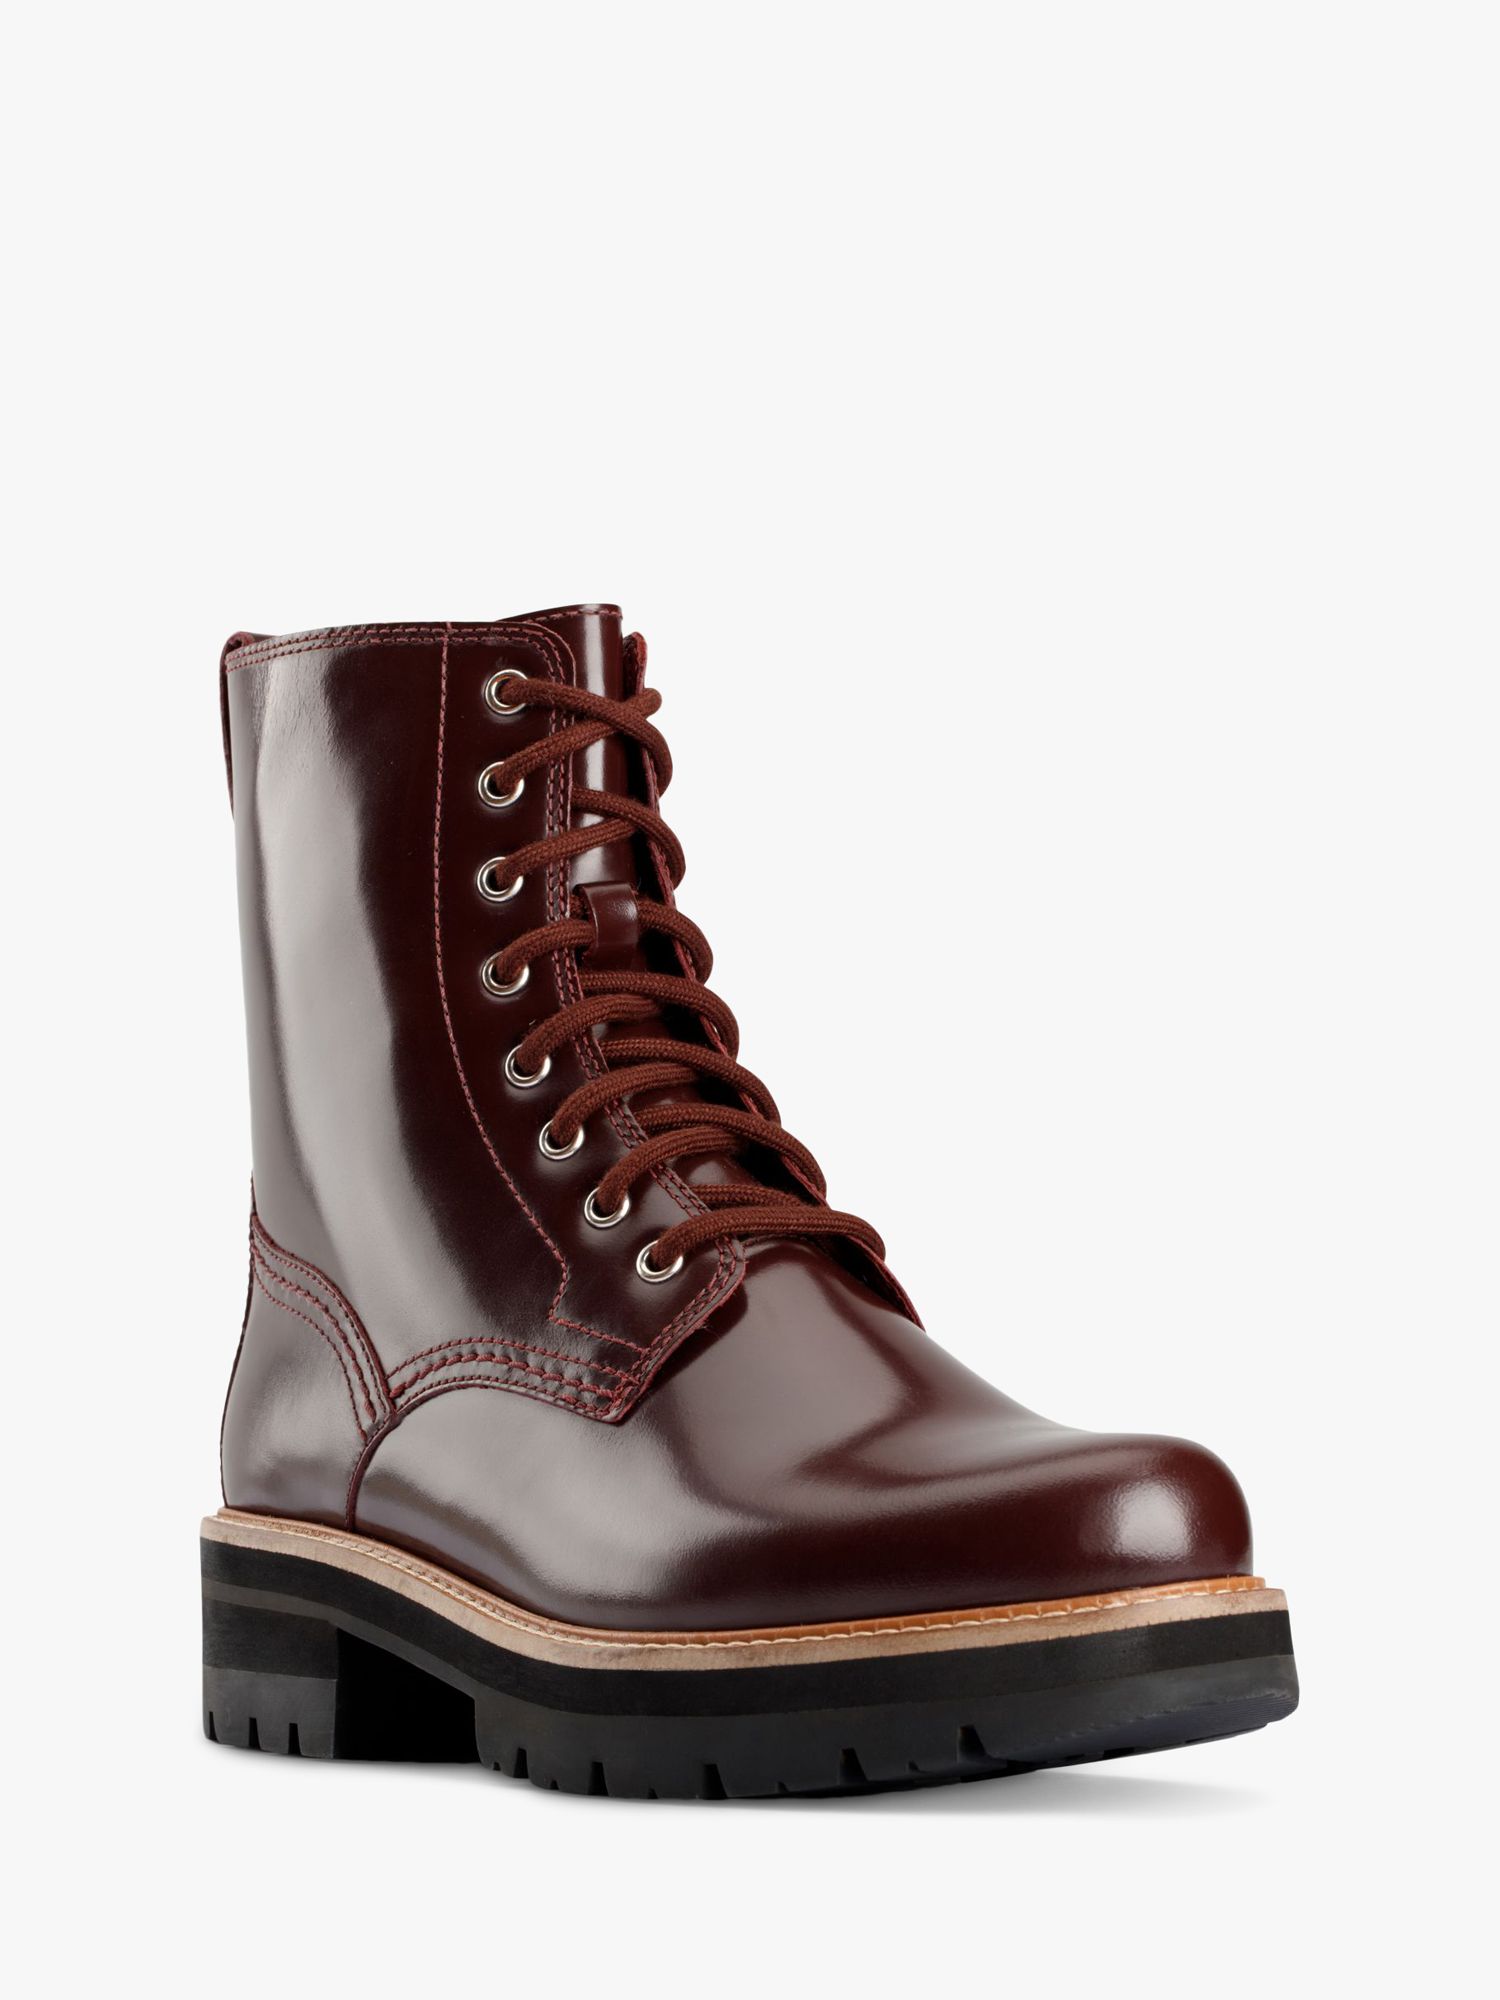 Clarks Orianna Leather Lace Up Ankle Boots, Merlot at John Lewis & Partners